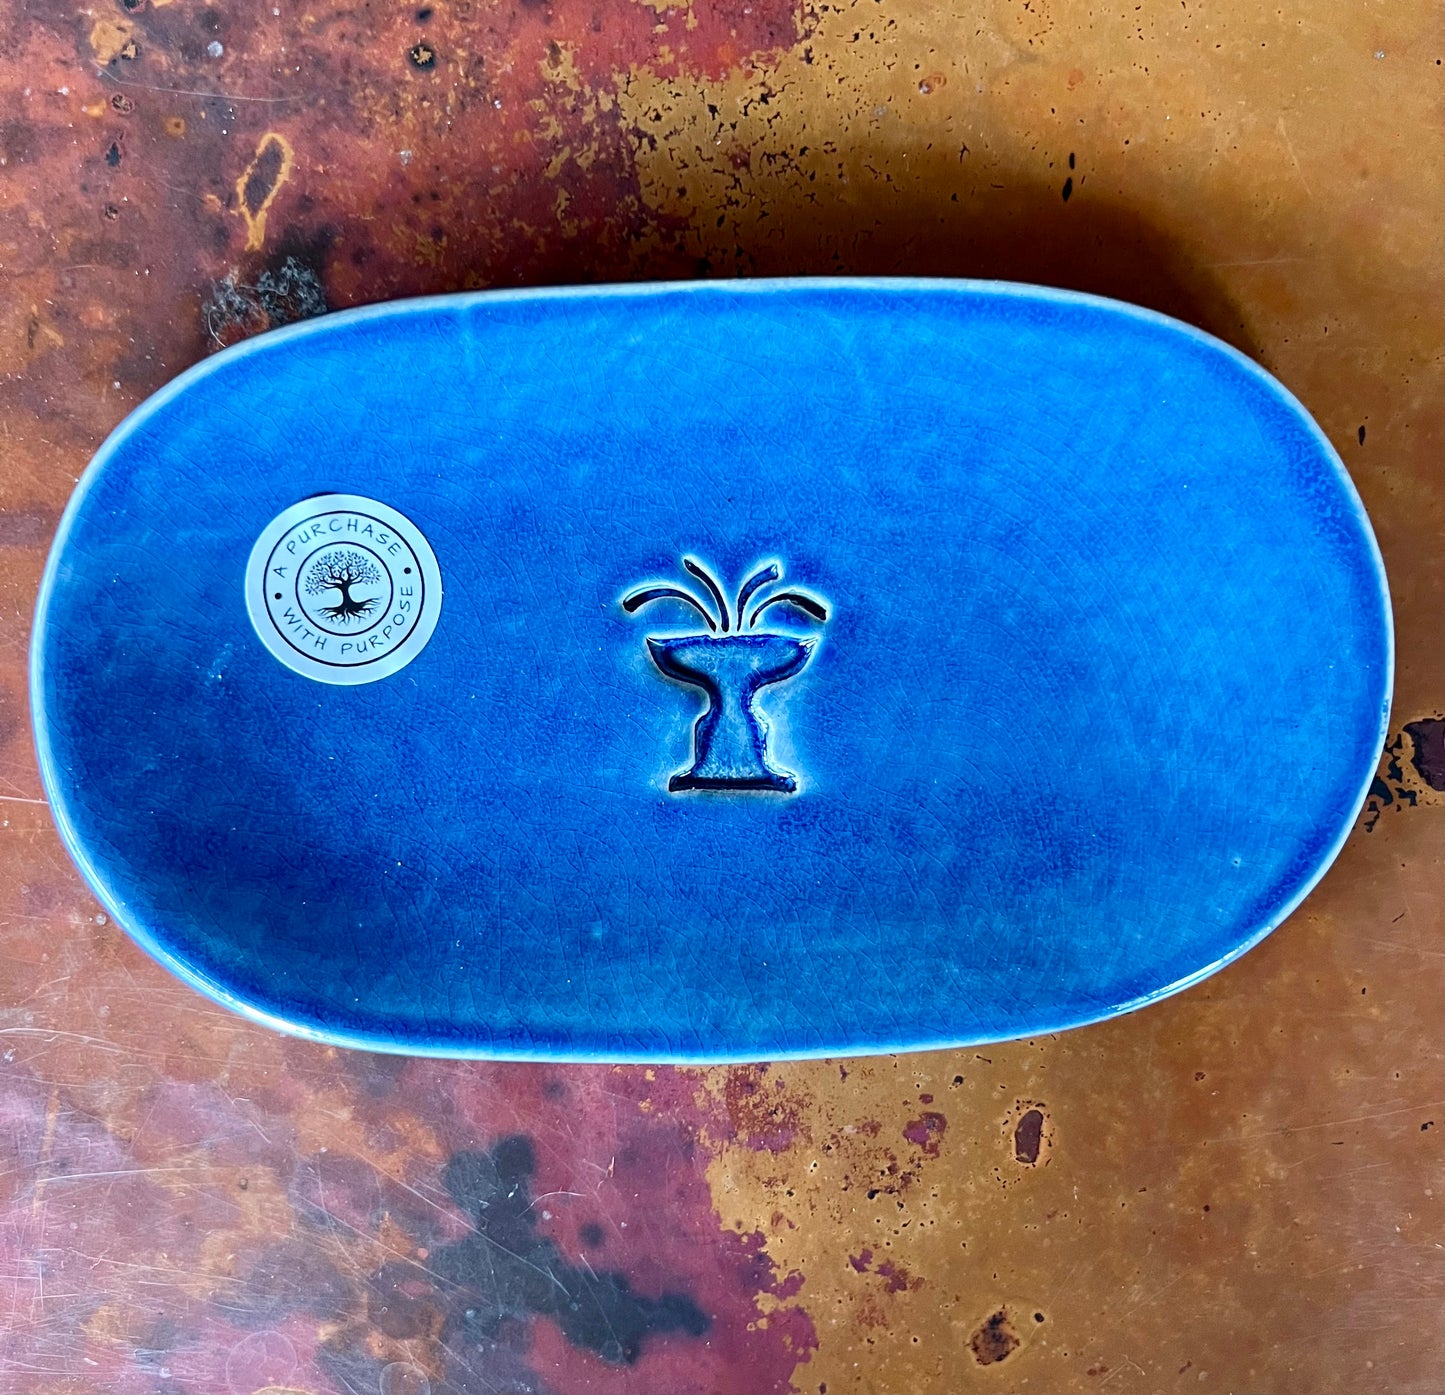 Handmade Trinket/Soap Dish - A Purchase with Purpose